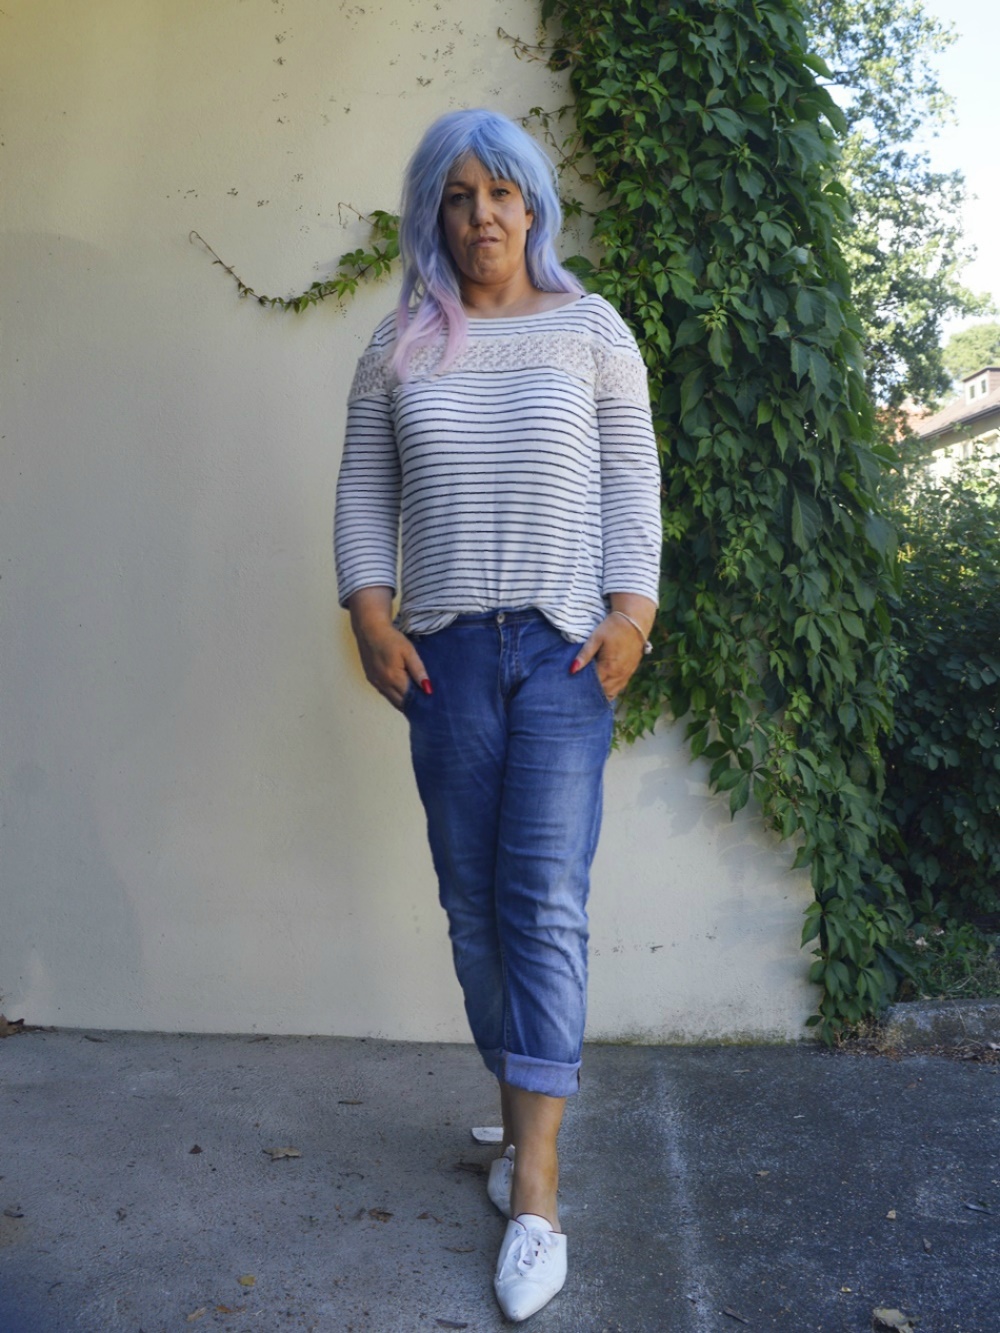 Striped Shirt with lace -  Summer Outfit with Baggy Boyfriend Jeans, striped shirt with lace  and white Leather mules,  posted by Annie K, Fashion and Lifestyle Blogger, Founder, CEO and writer of ANNIES BEAUTY HOUSE - a german fashion and beauty blog